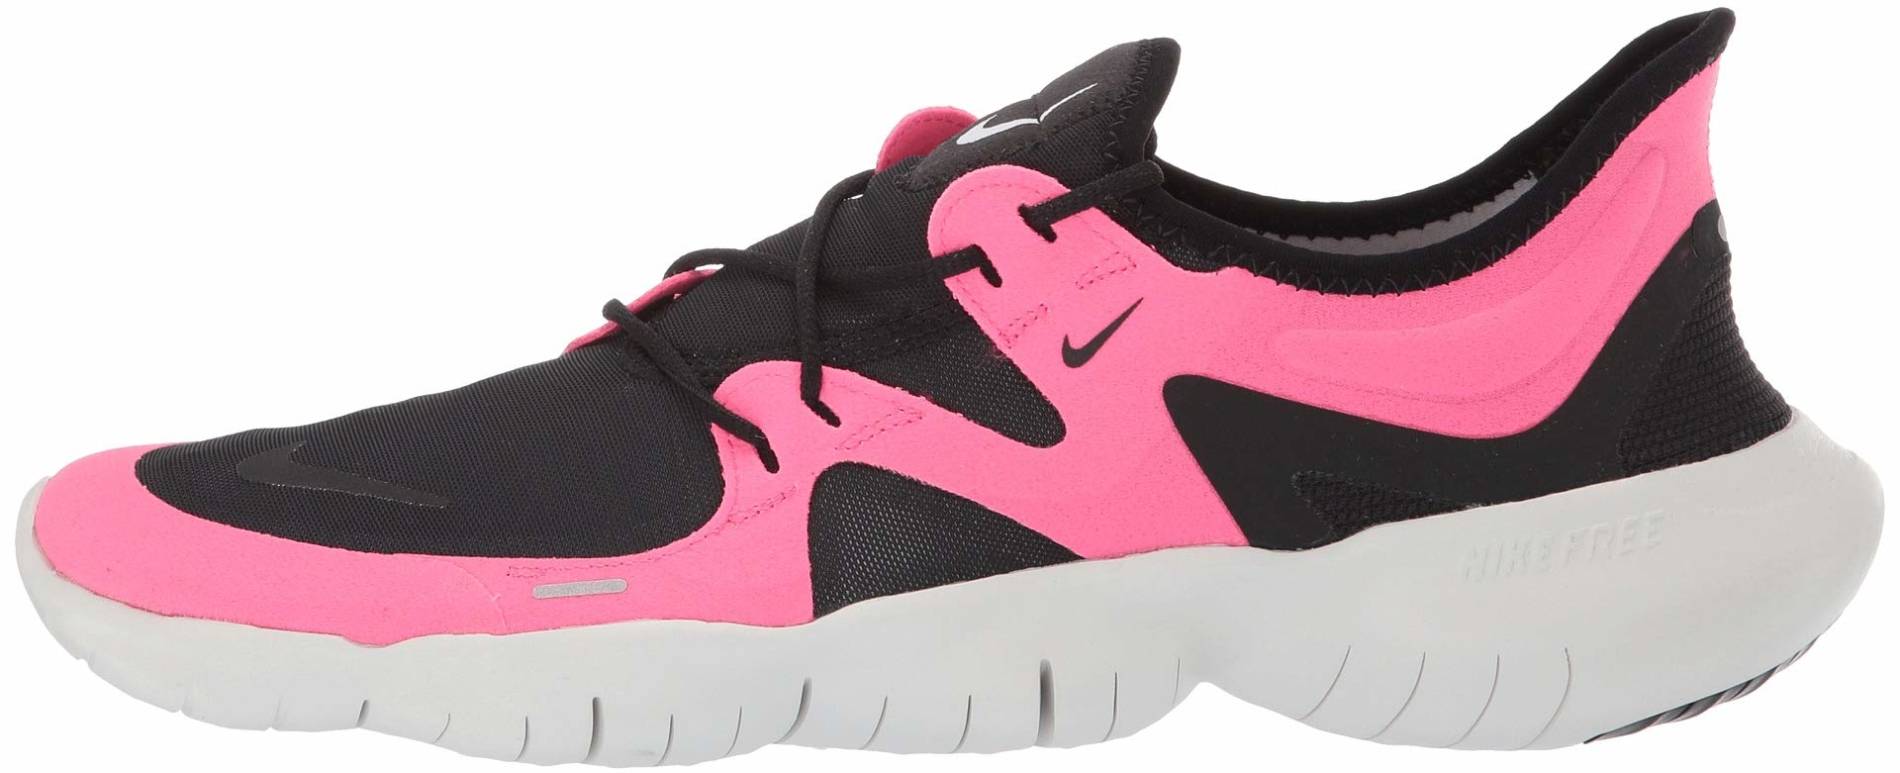 Save 23% on Pink Running Shoes (45 